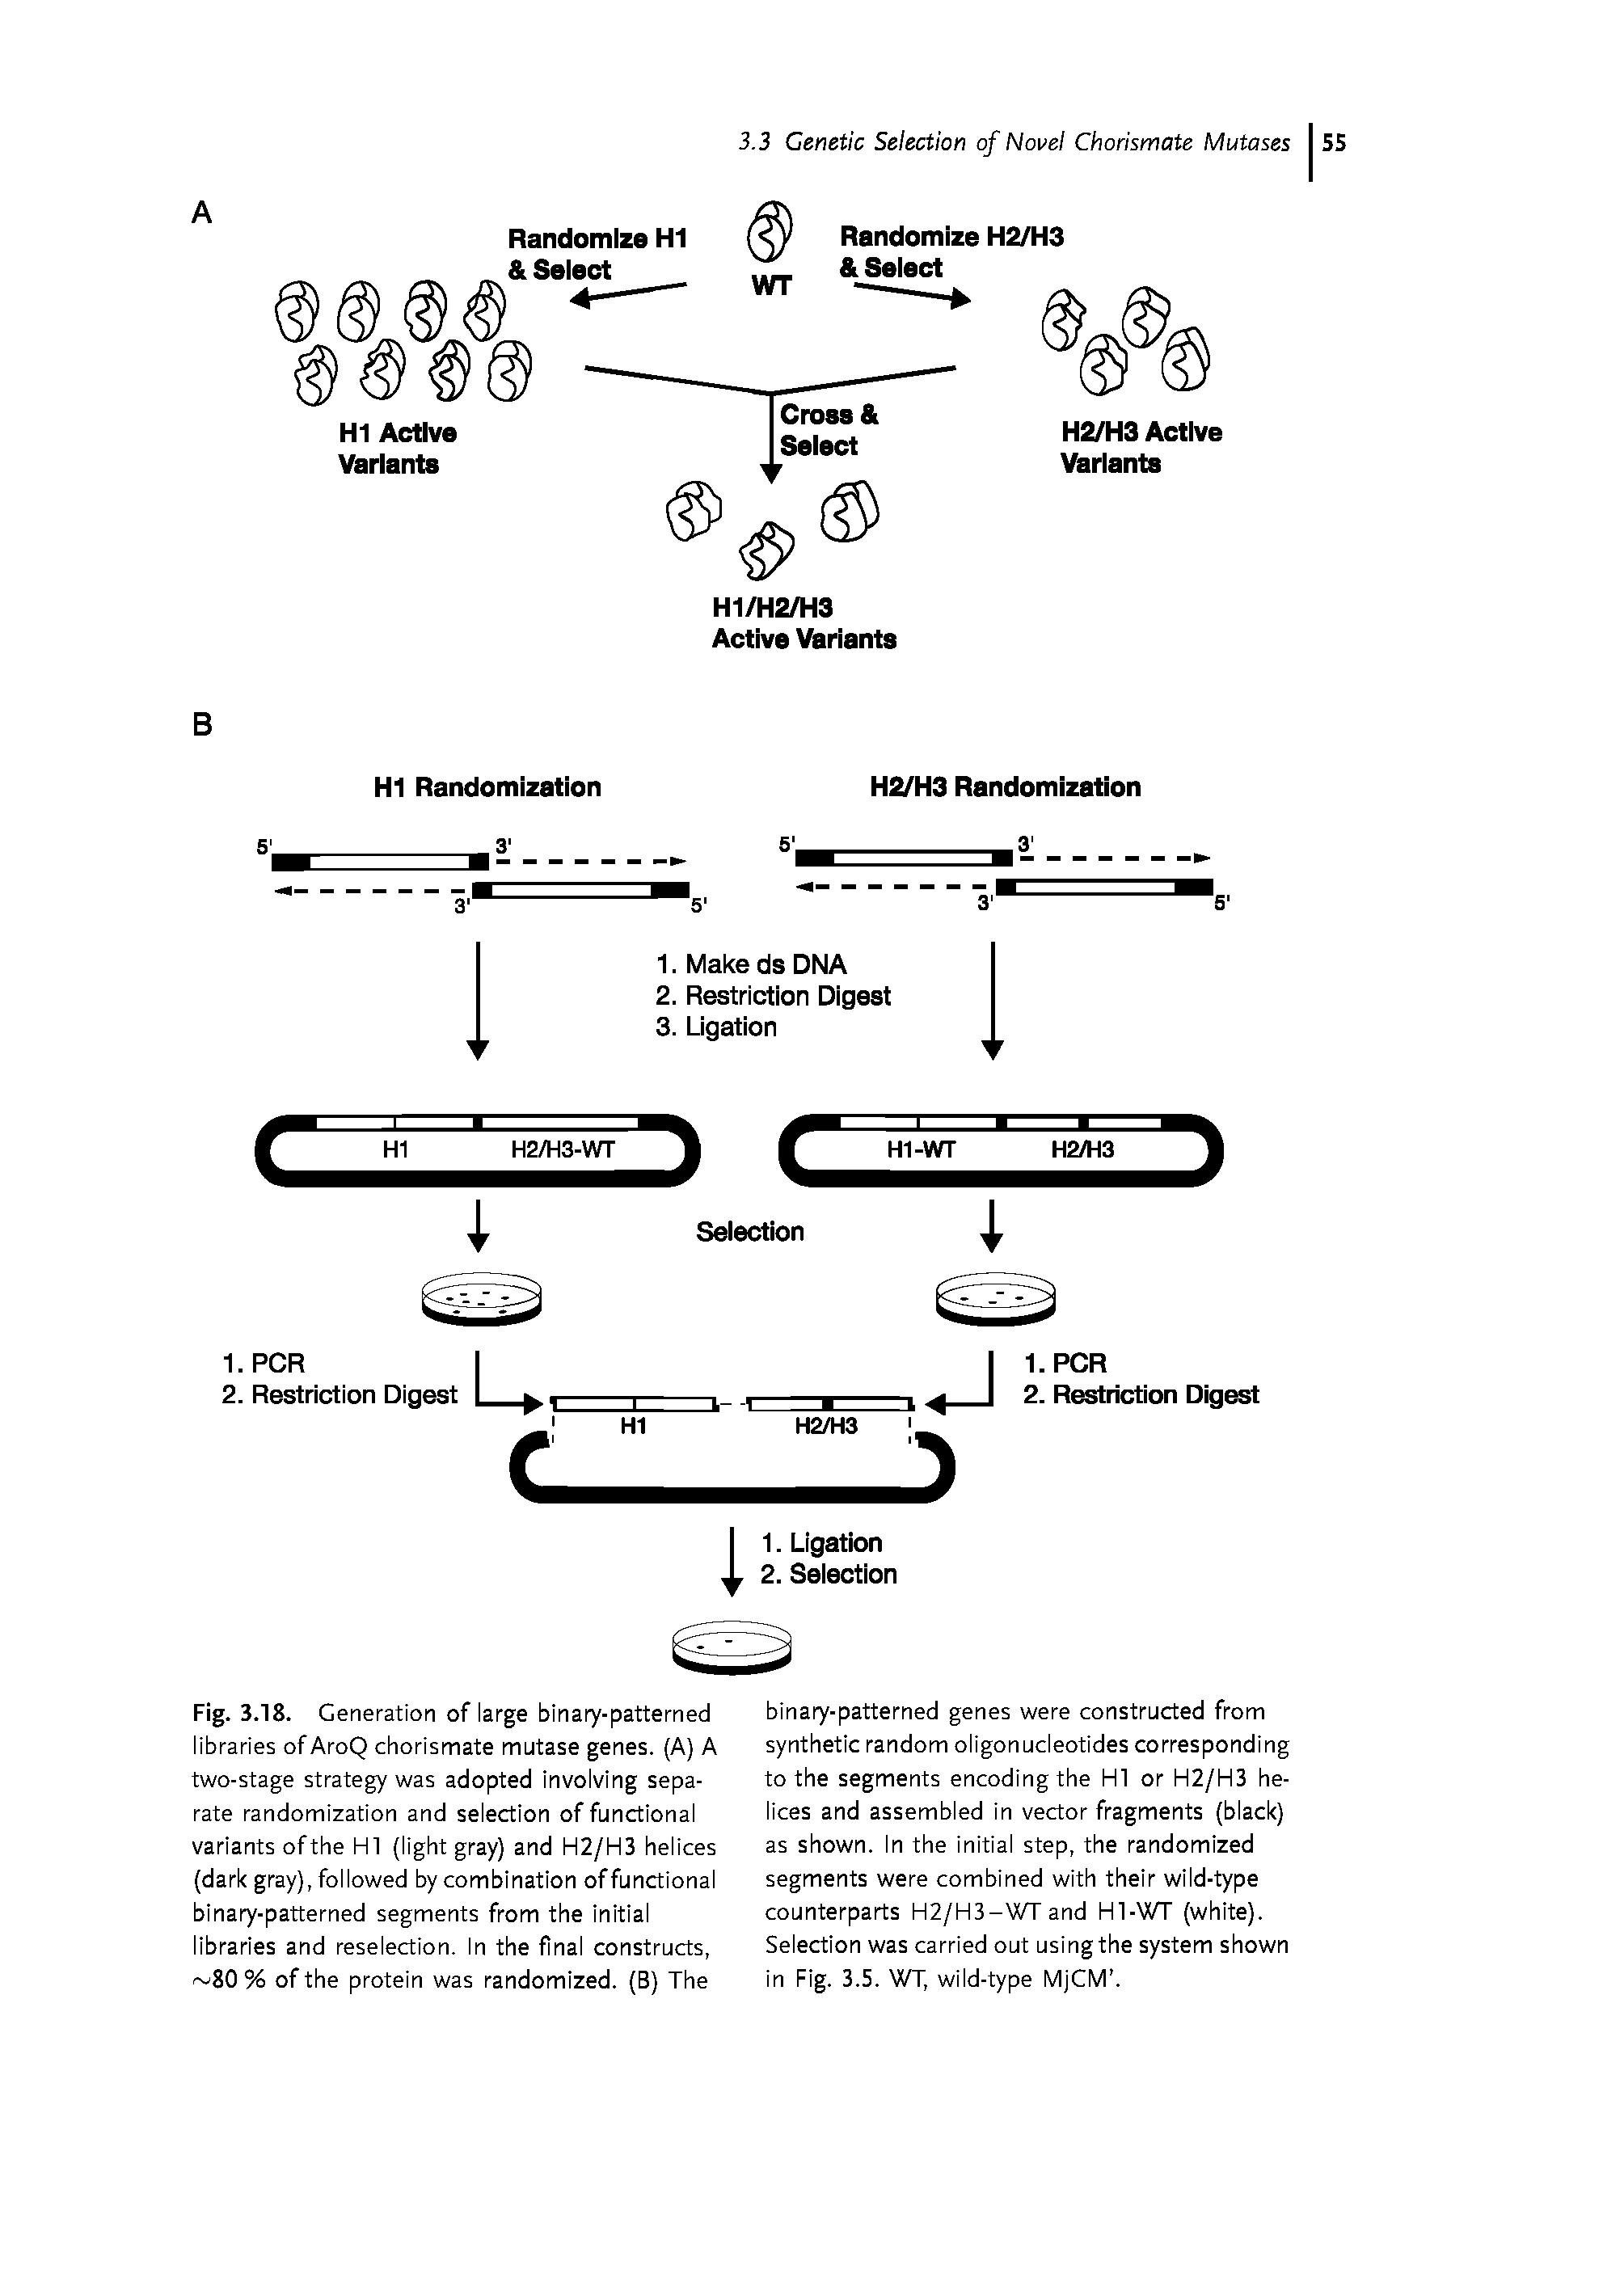 Fig. 3.18. Generation of large binary-patterned libraries ofAroQ chorismate mutase genes. (A) A two-stage strategy was adopted involving separate randomization and selection of functional variants ofthe HI (light gray) and H2/H3 helices (dark gray), followed by combination of functional binary-patterned segments from the initial libraries and reselection. In the final constructs, 80 % of the protein was randomized. (B) The...